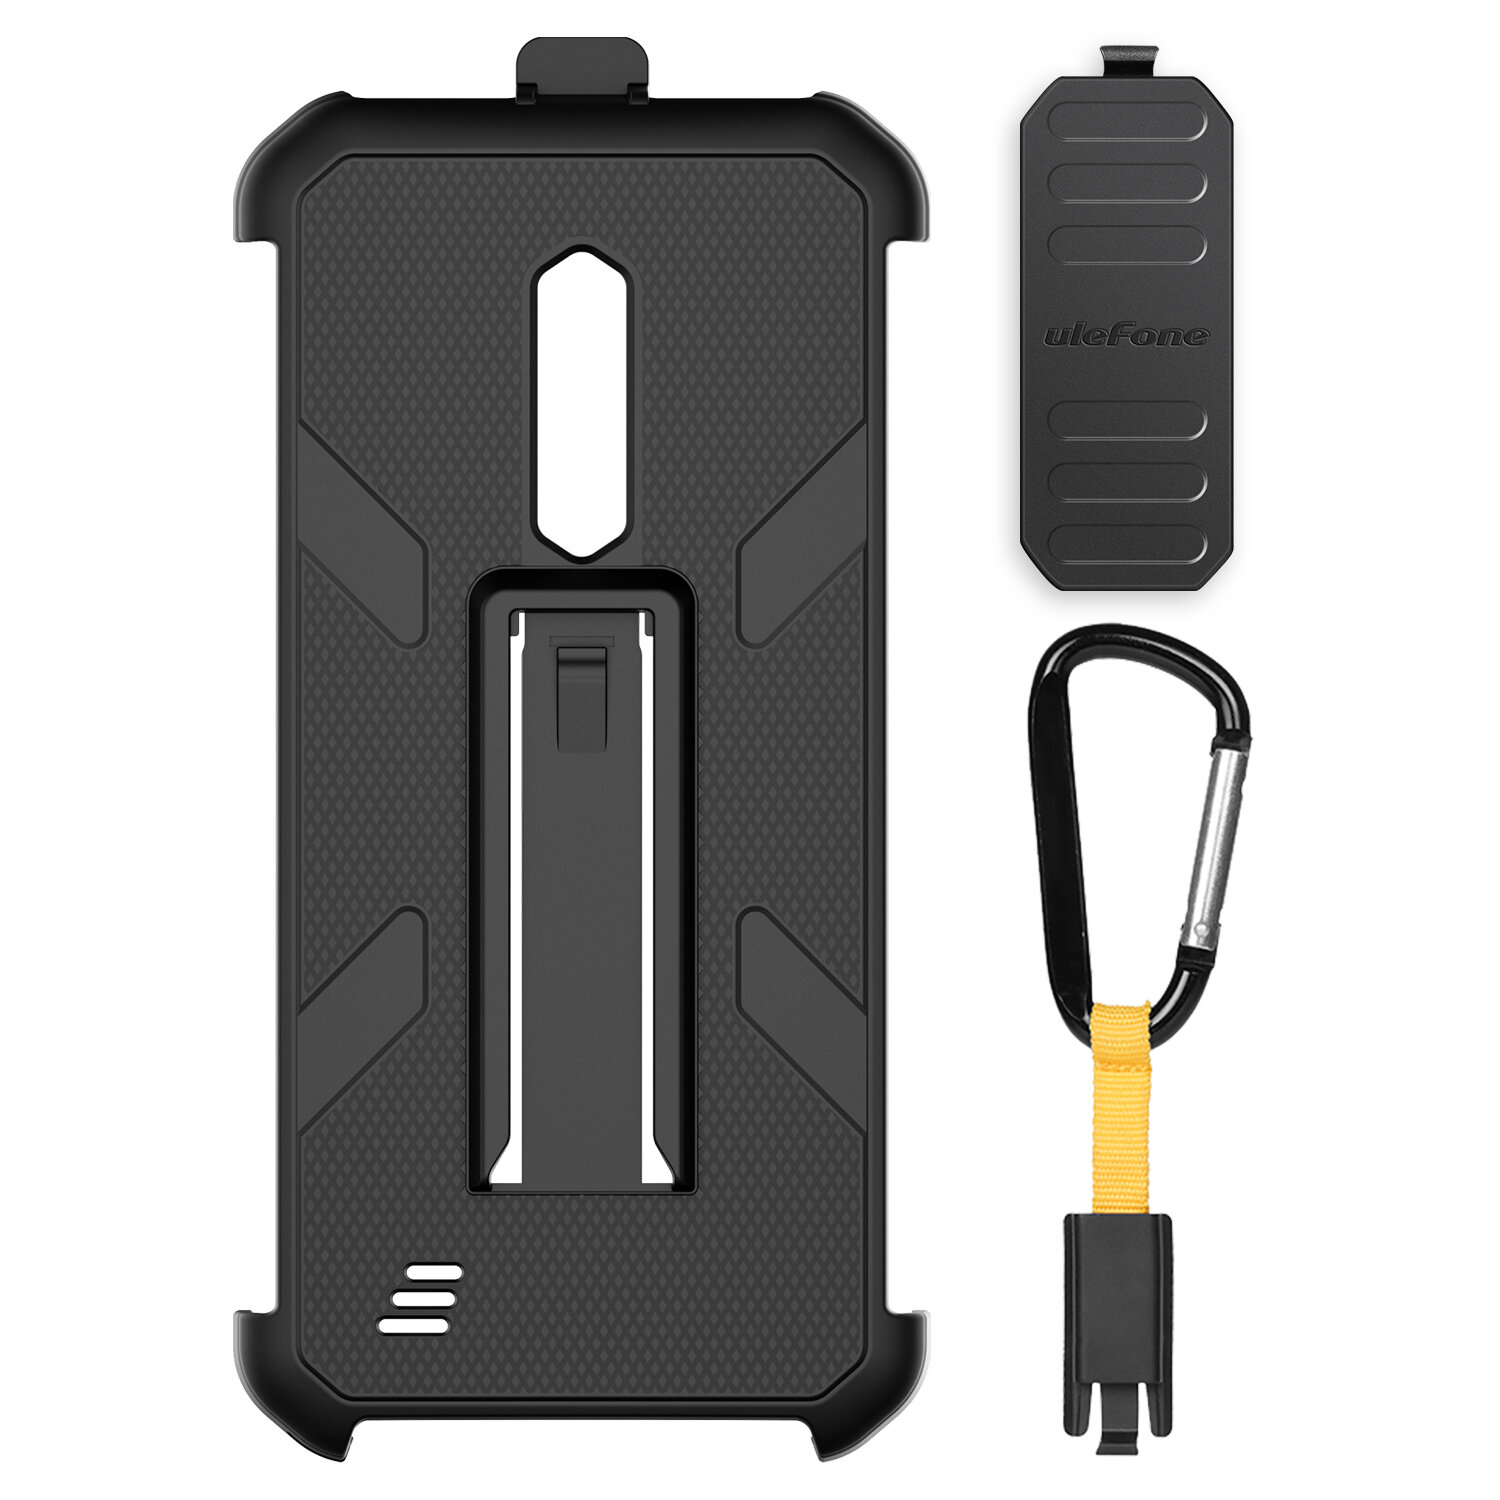 

Original Ulefone Multifunctional Protective Case Cover with Back Clip and Carabiner For Ulefone Armor X12 Pro